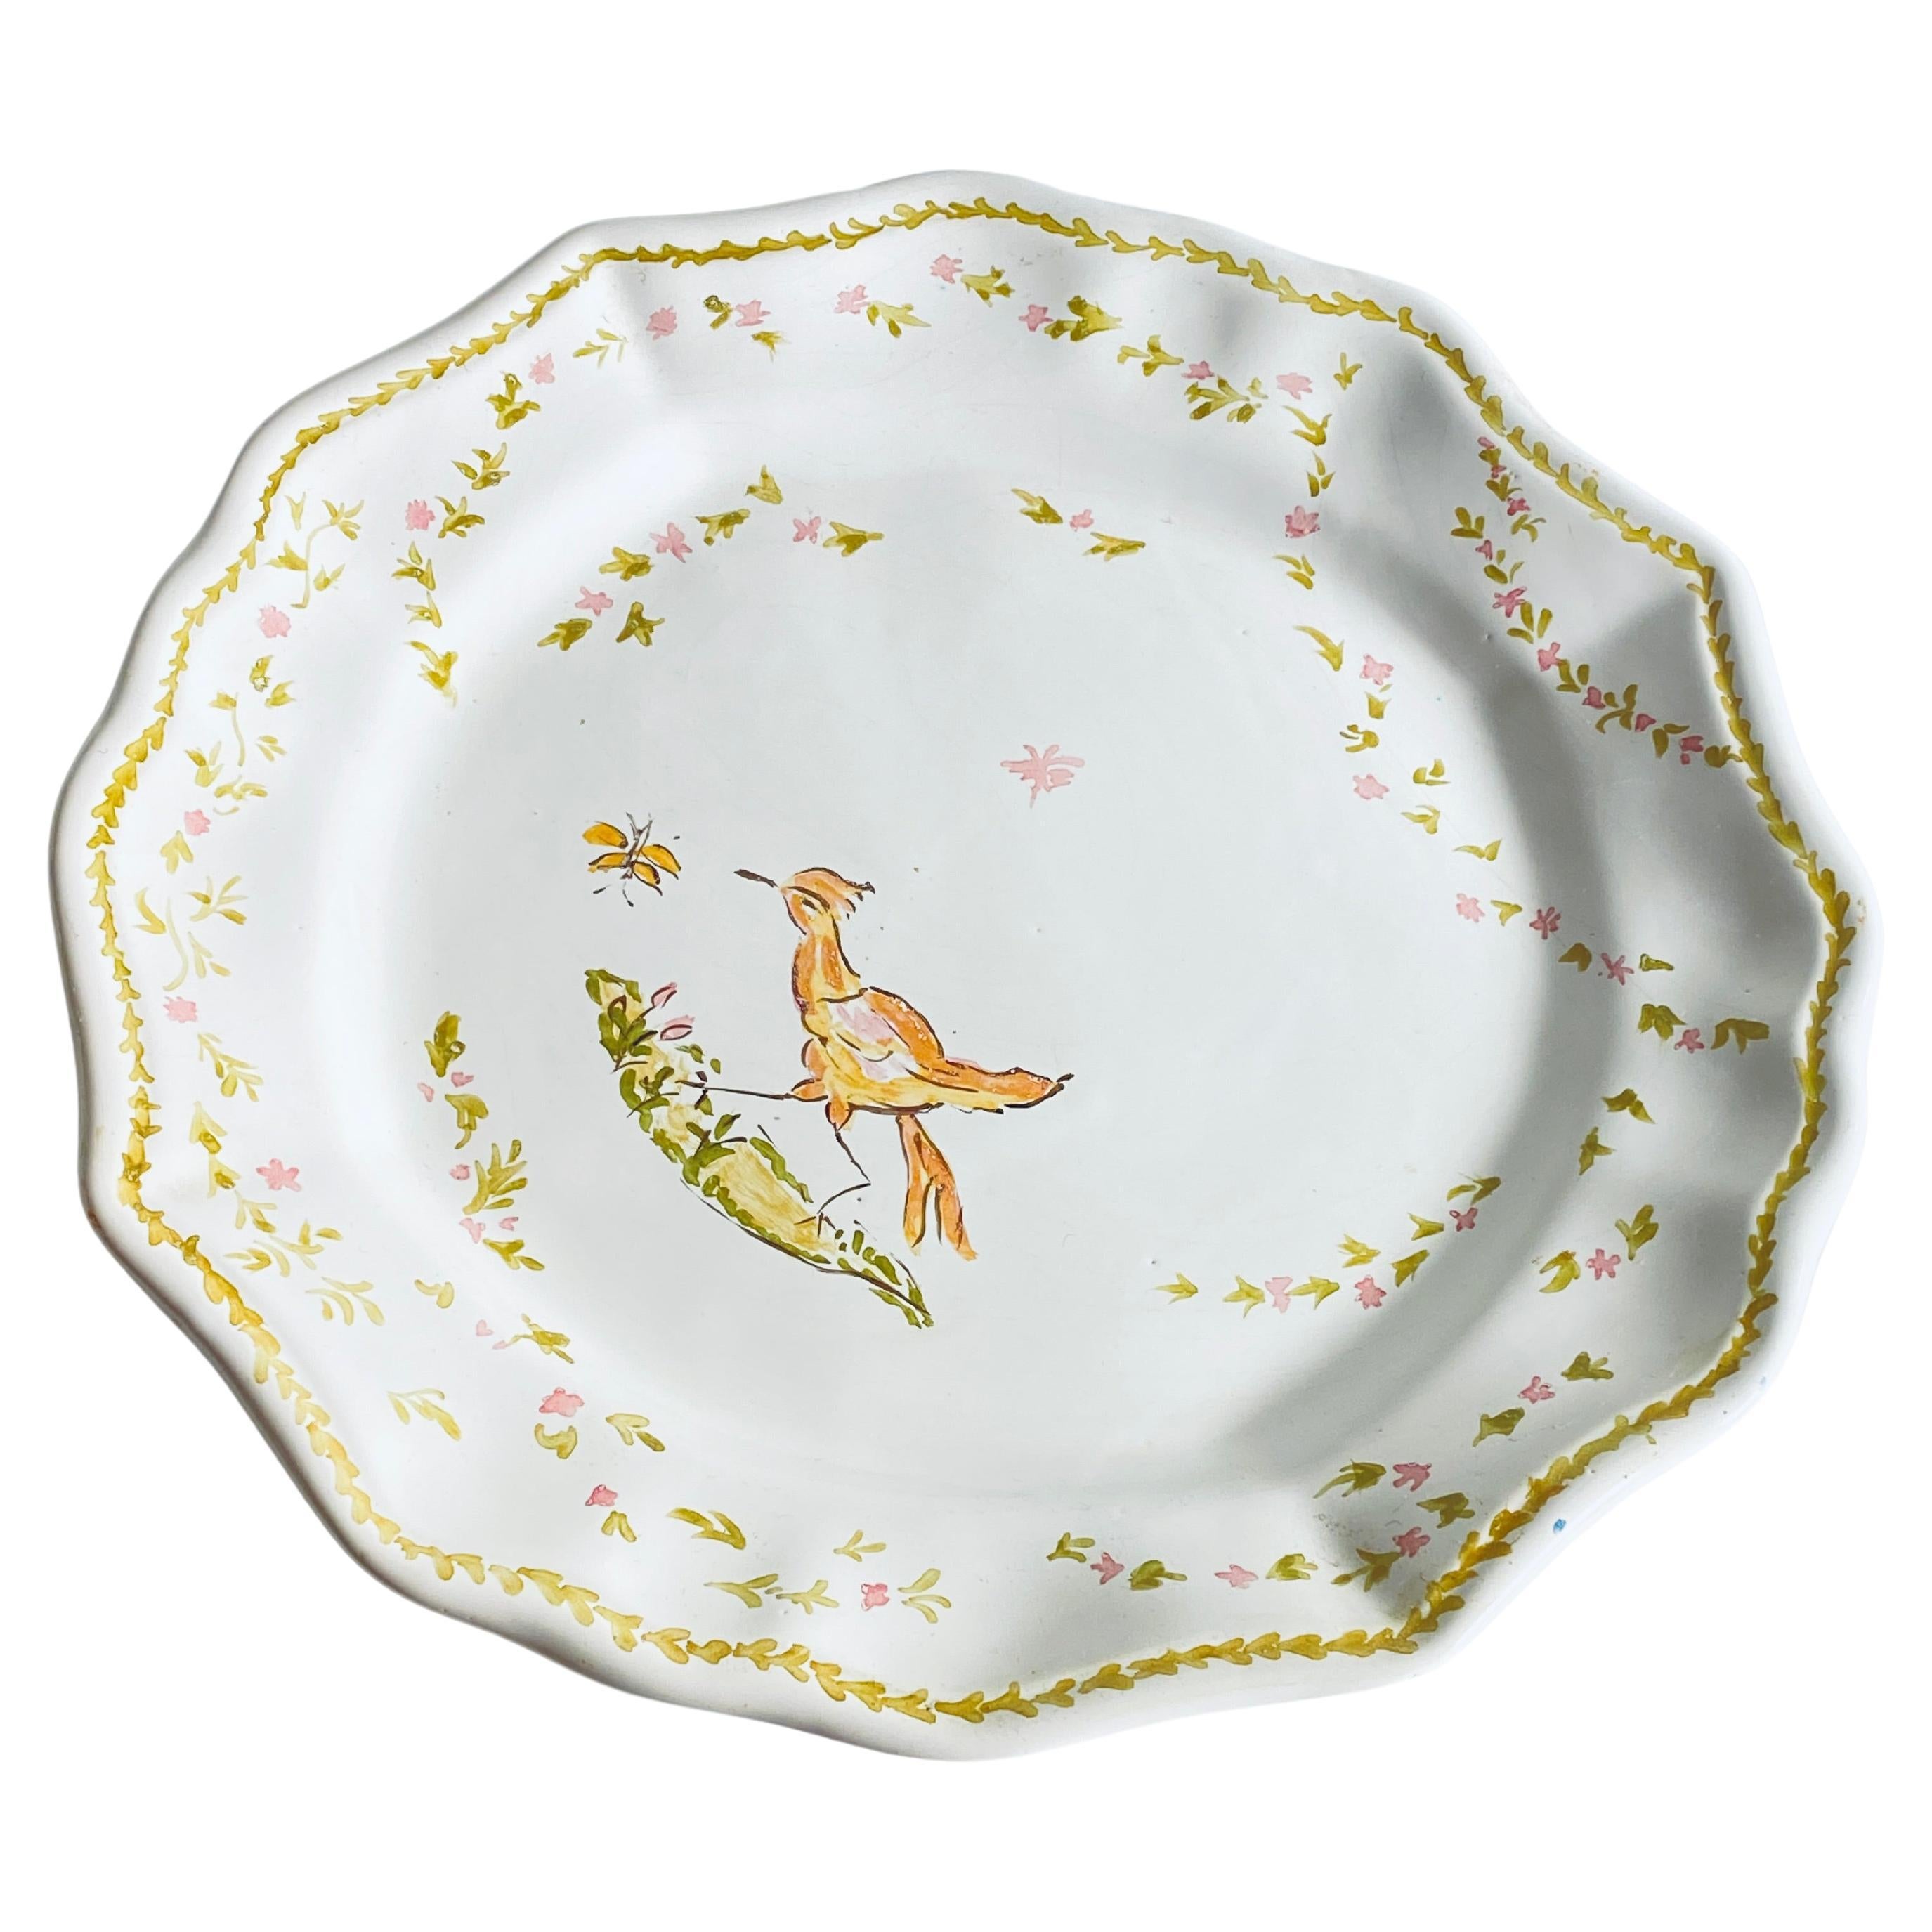 Faience Dish, by Moustier, with Birds and Flowers Decor, France 19th, Signed For Sale